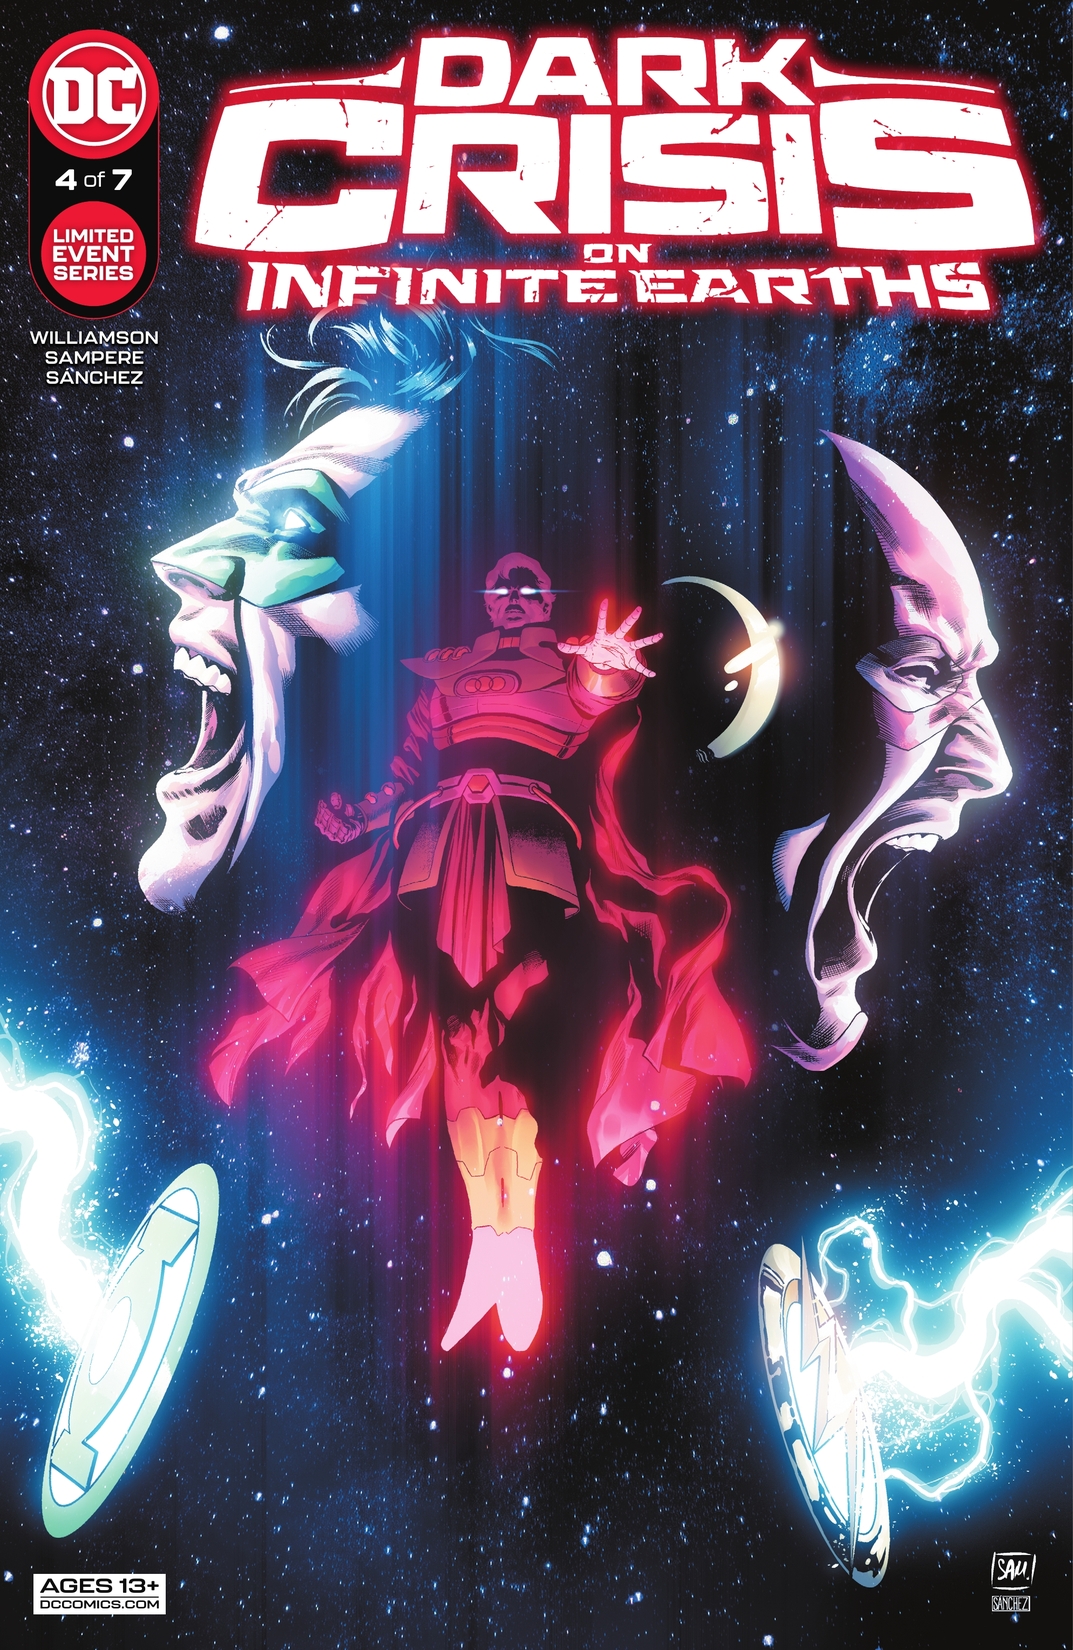 Dark Crisis on Infinite Earths #4 preview images